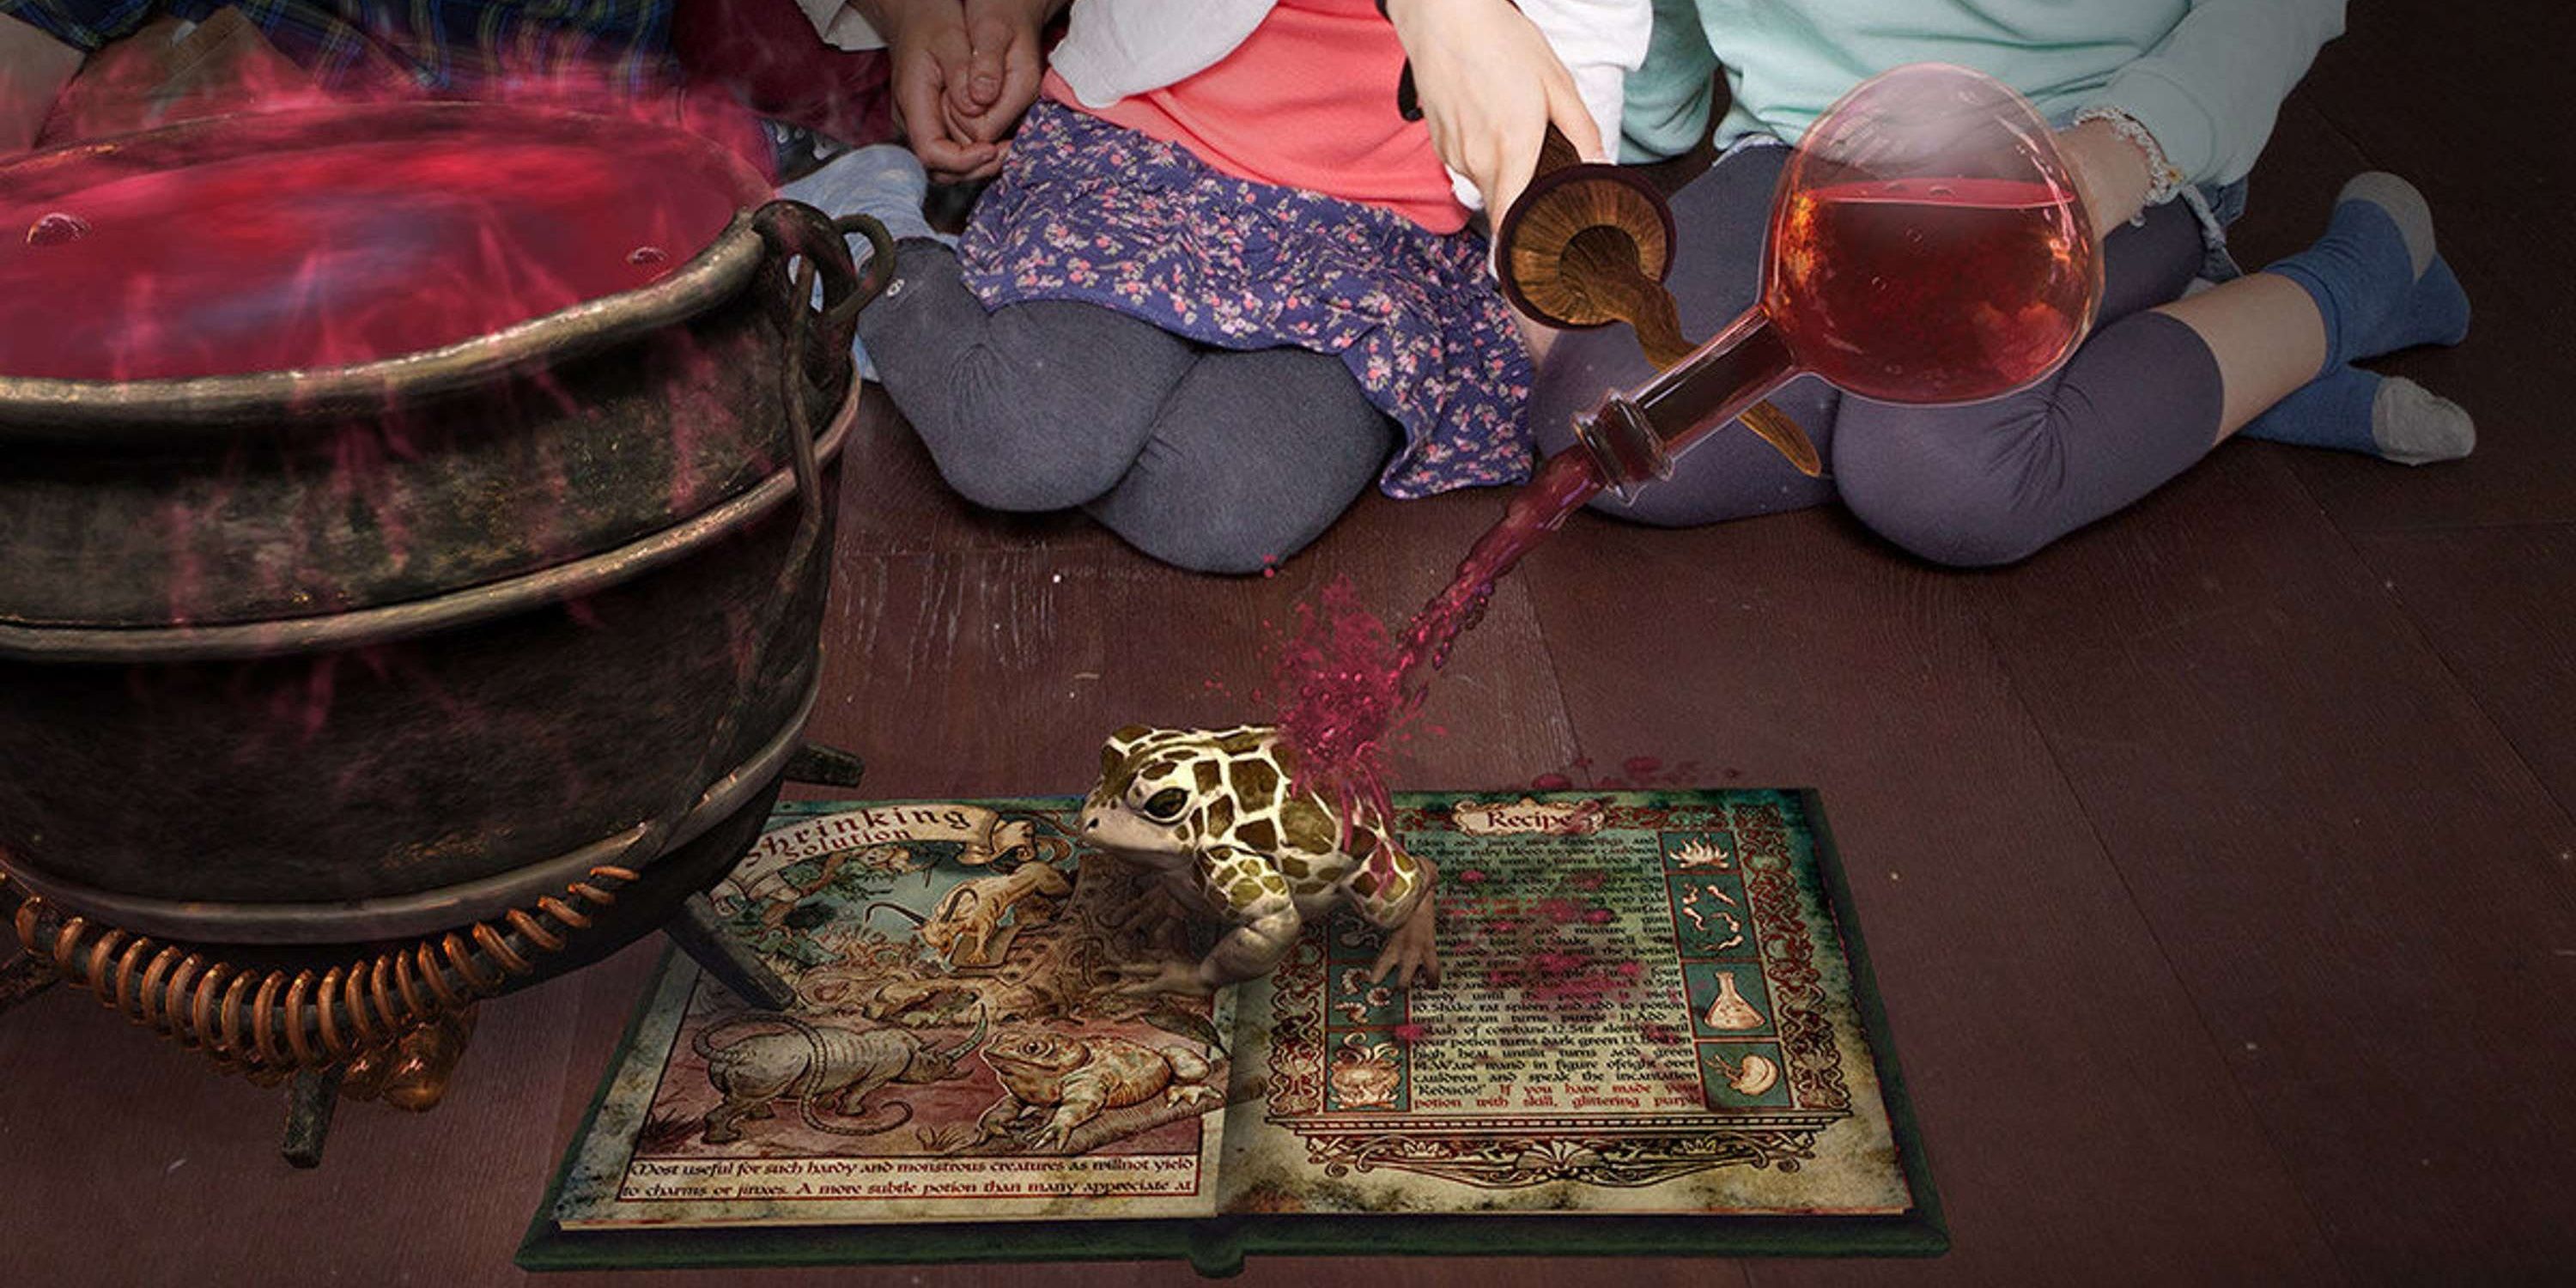 Players pouring a potion onto a toad in Book of Potions